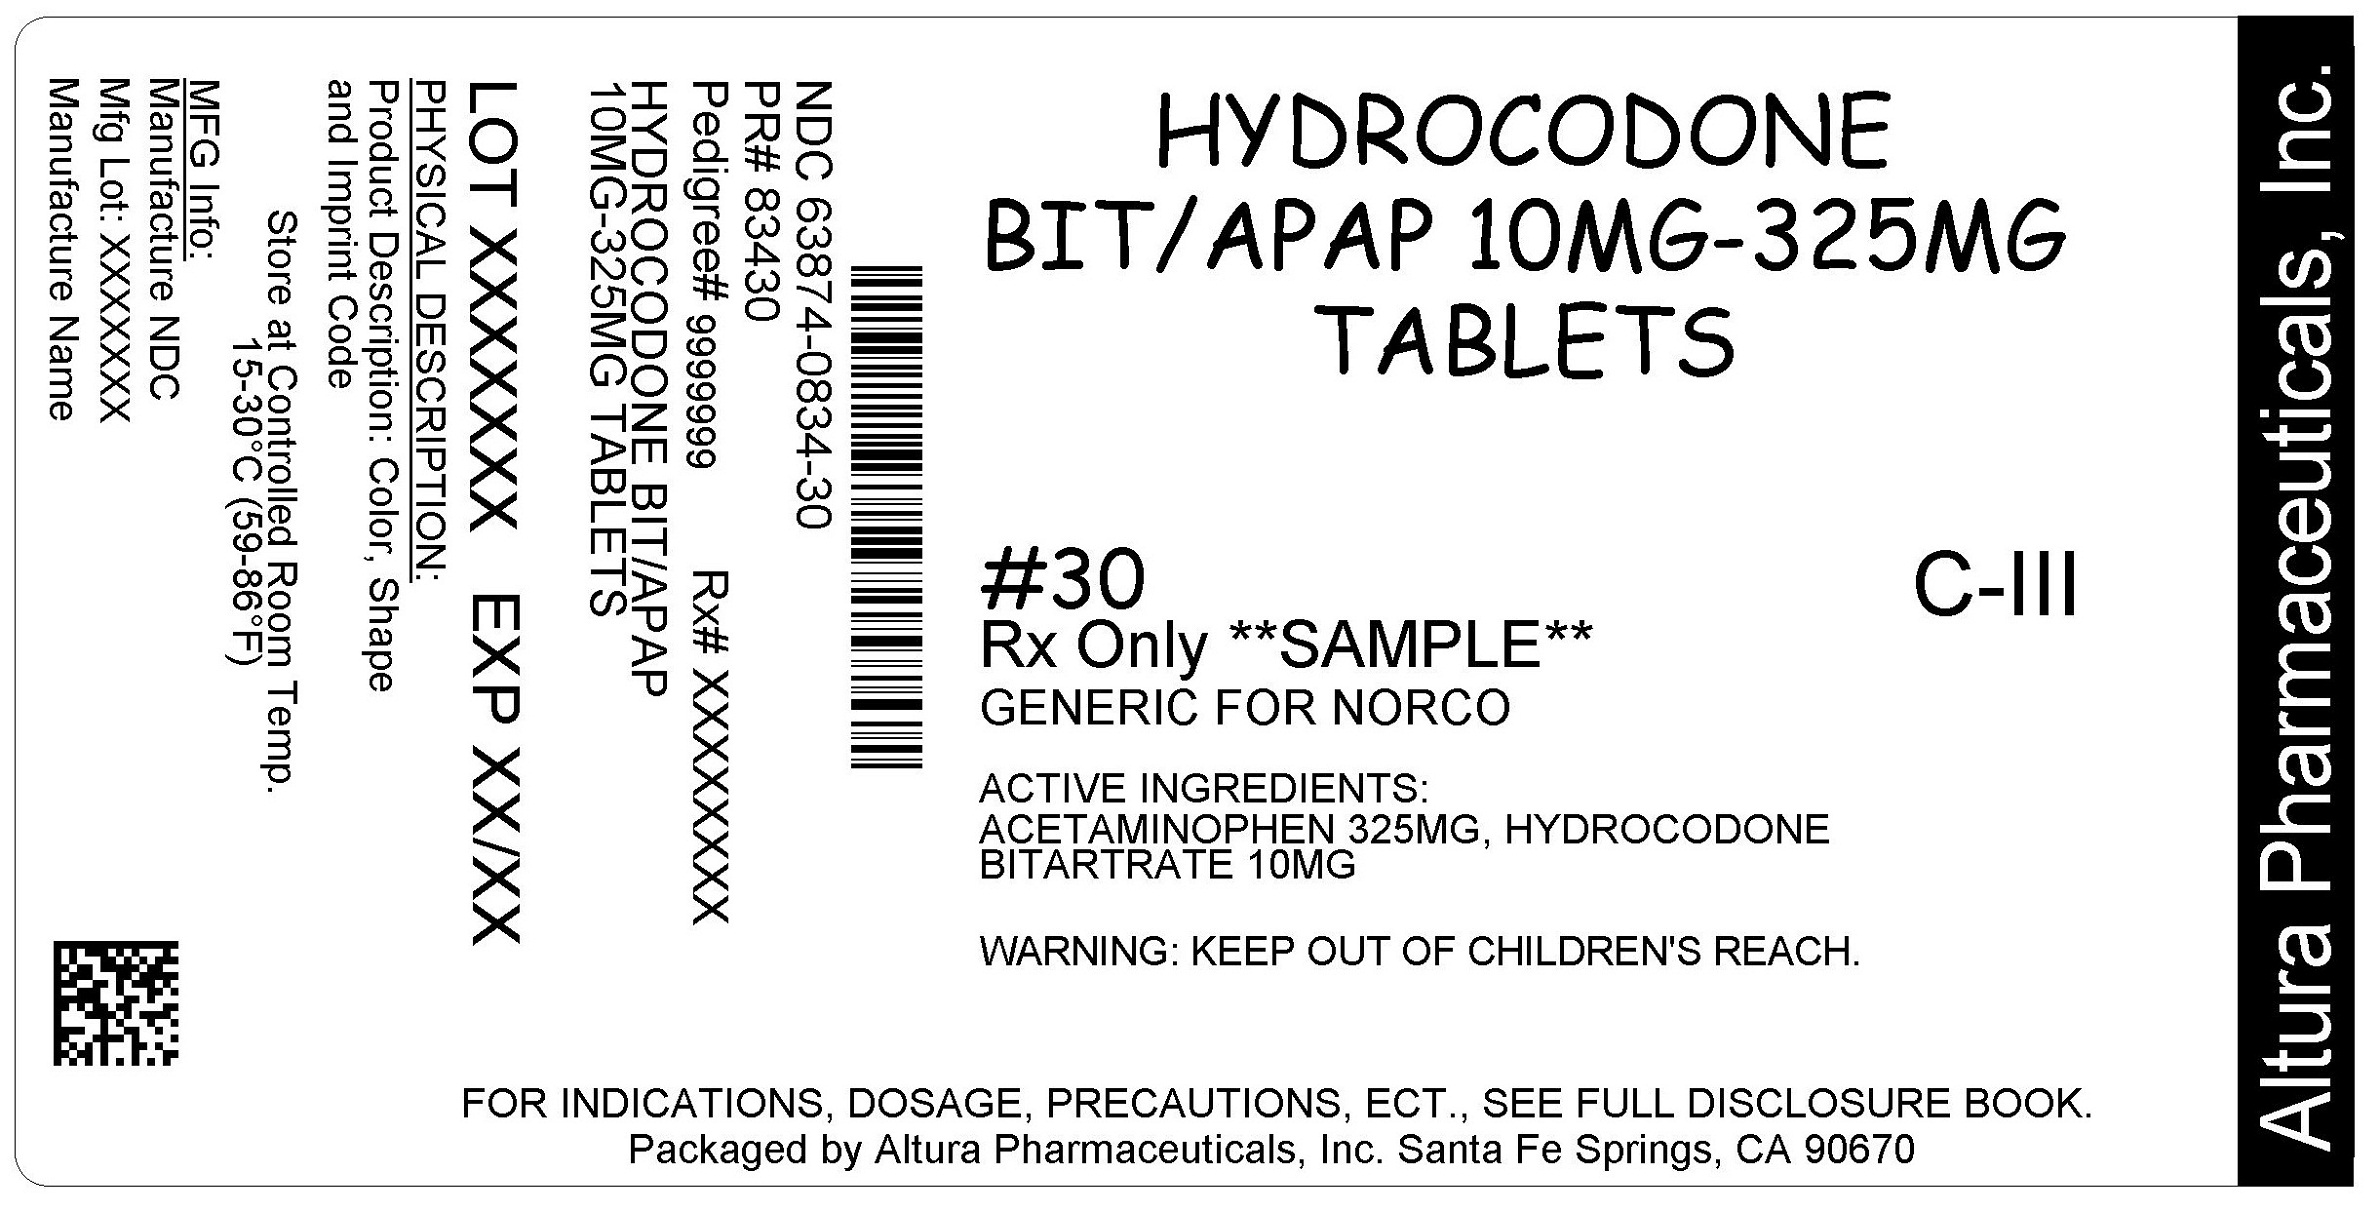 This is an image of the label for 10 mg/325 mg Hydrocodone Bitartrate and Acetaminophen Tablets.